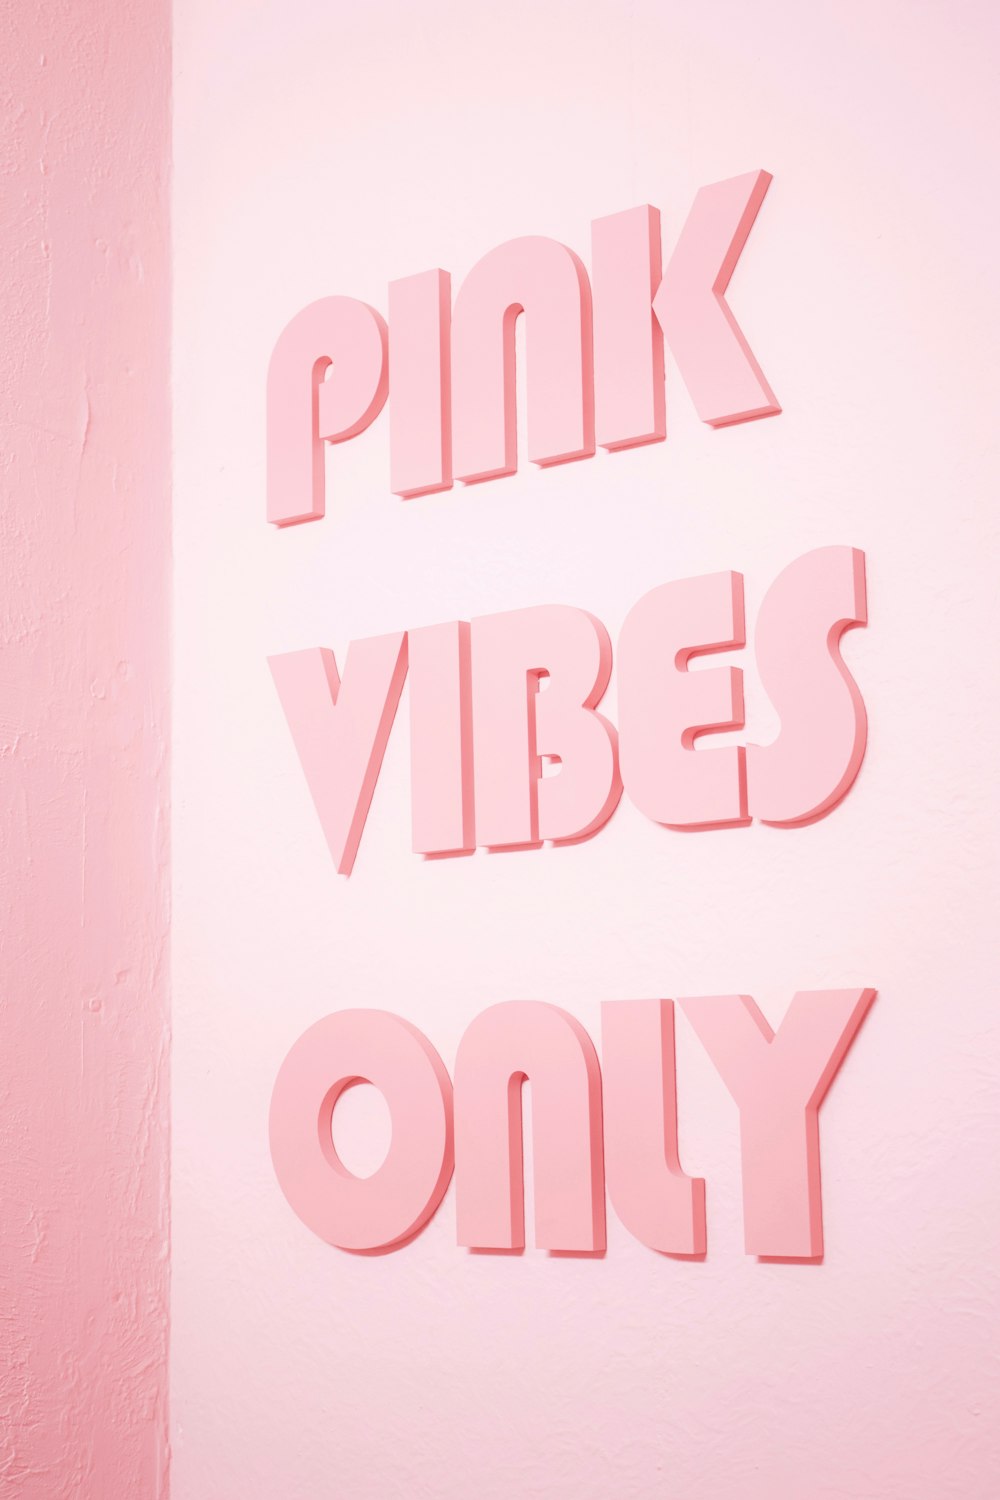 Pink Vibes Solo texto